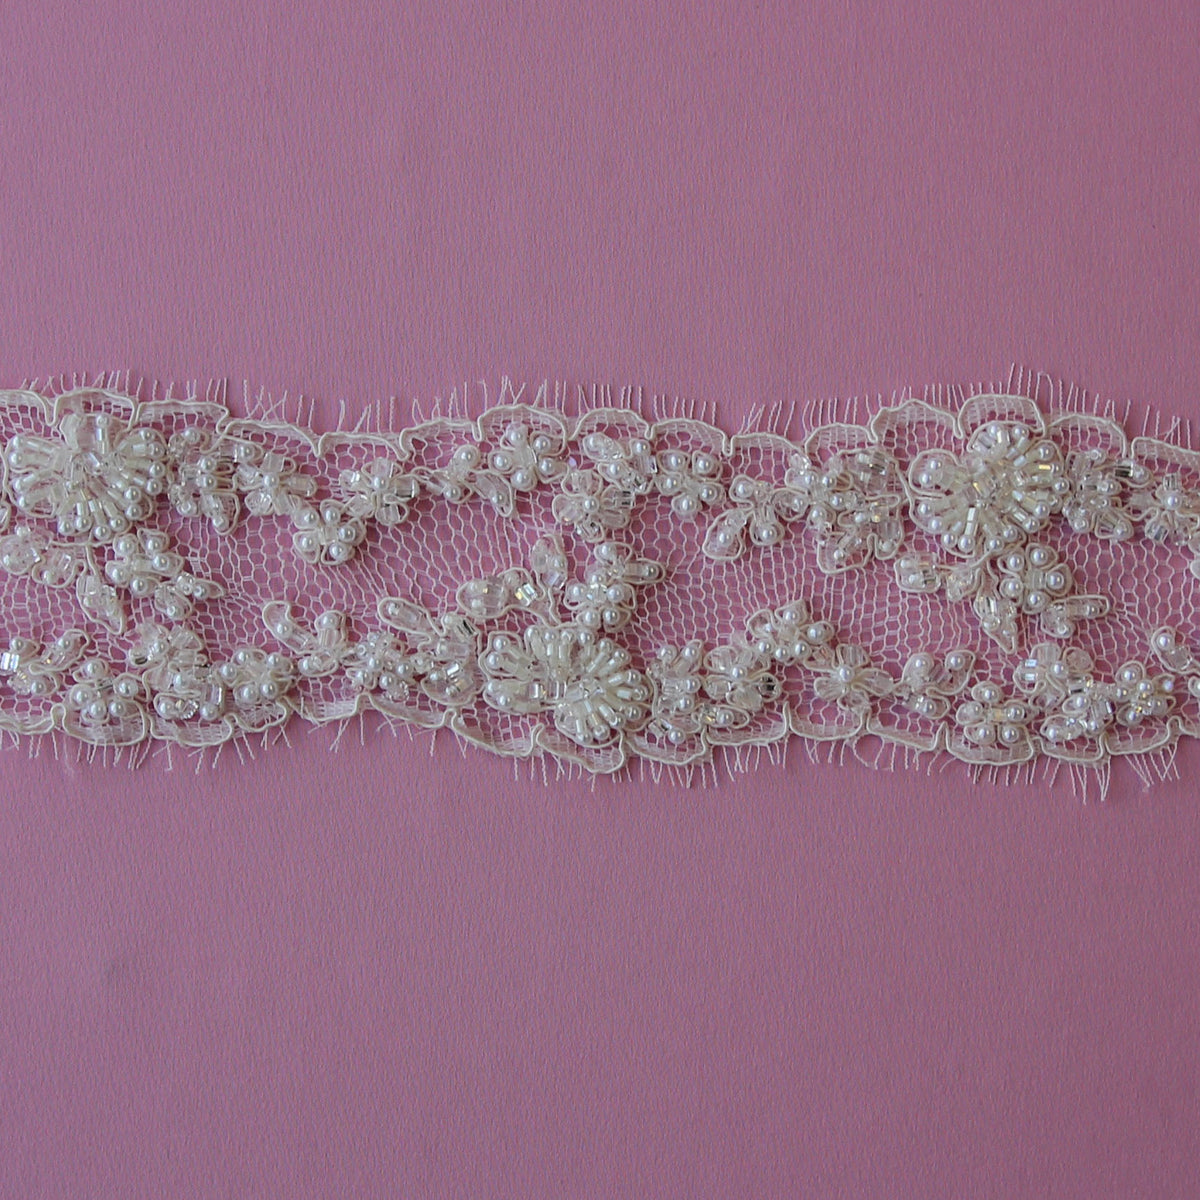 White Beaded Lace Trim - Delilah